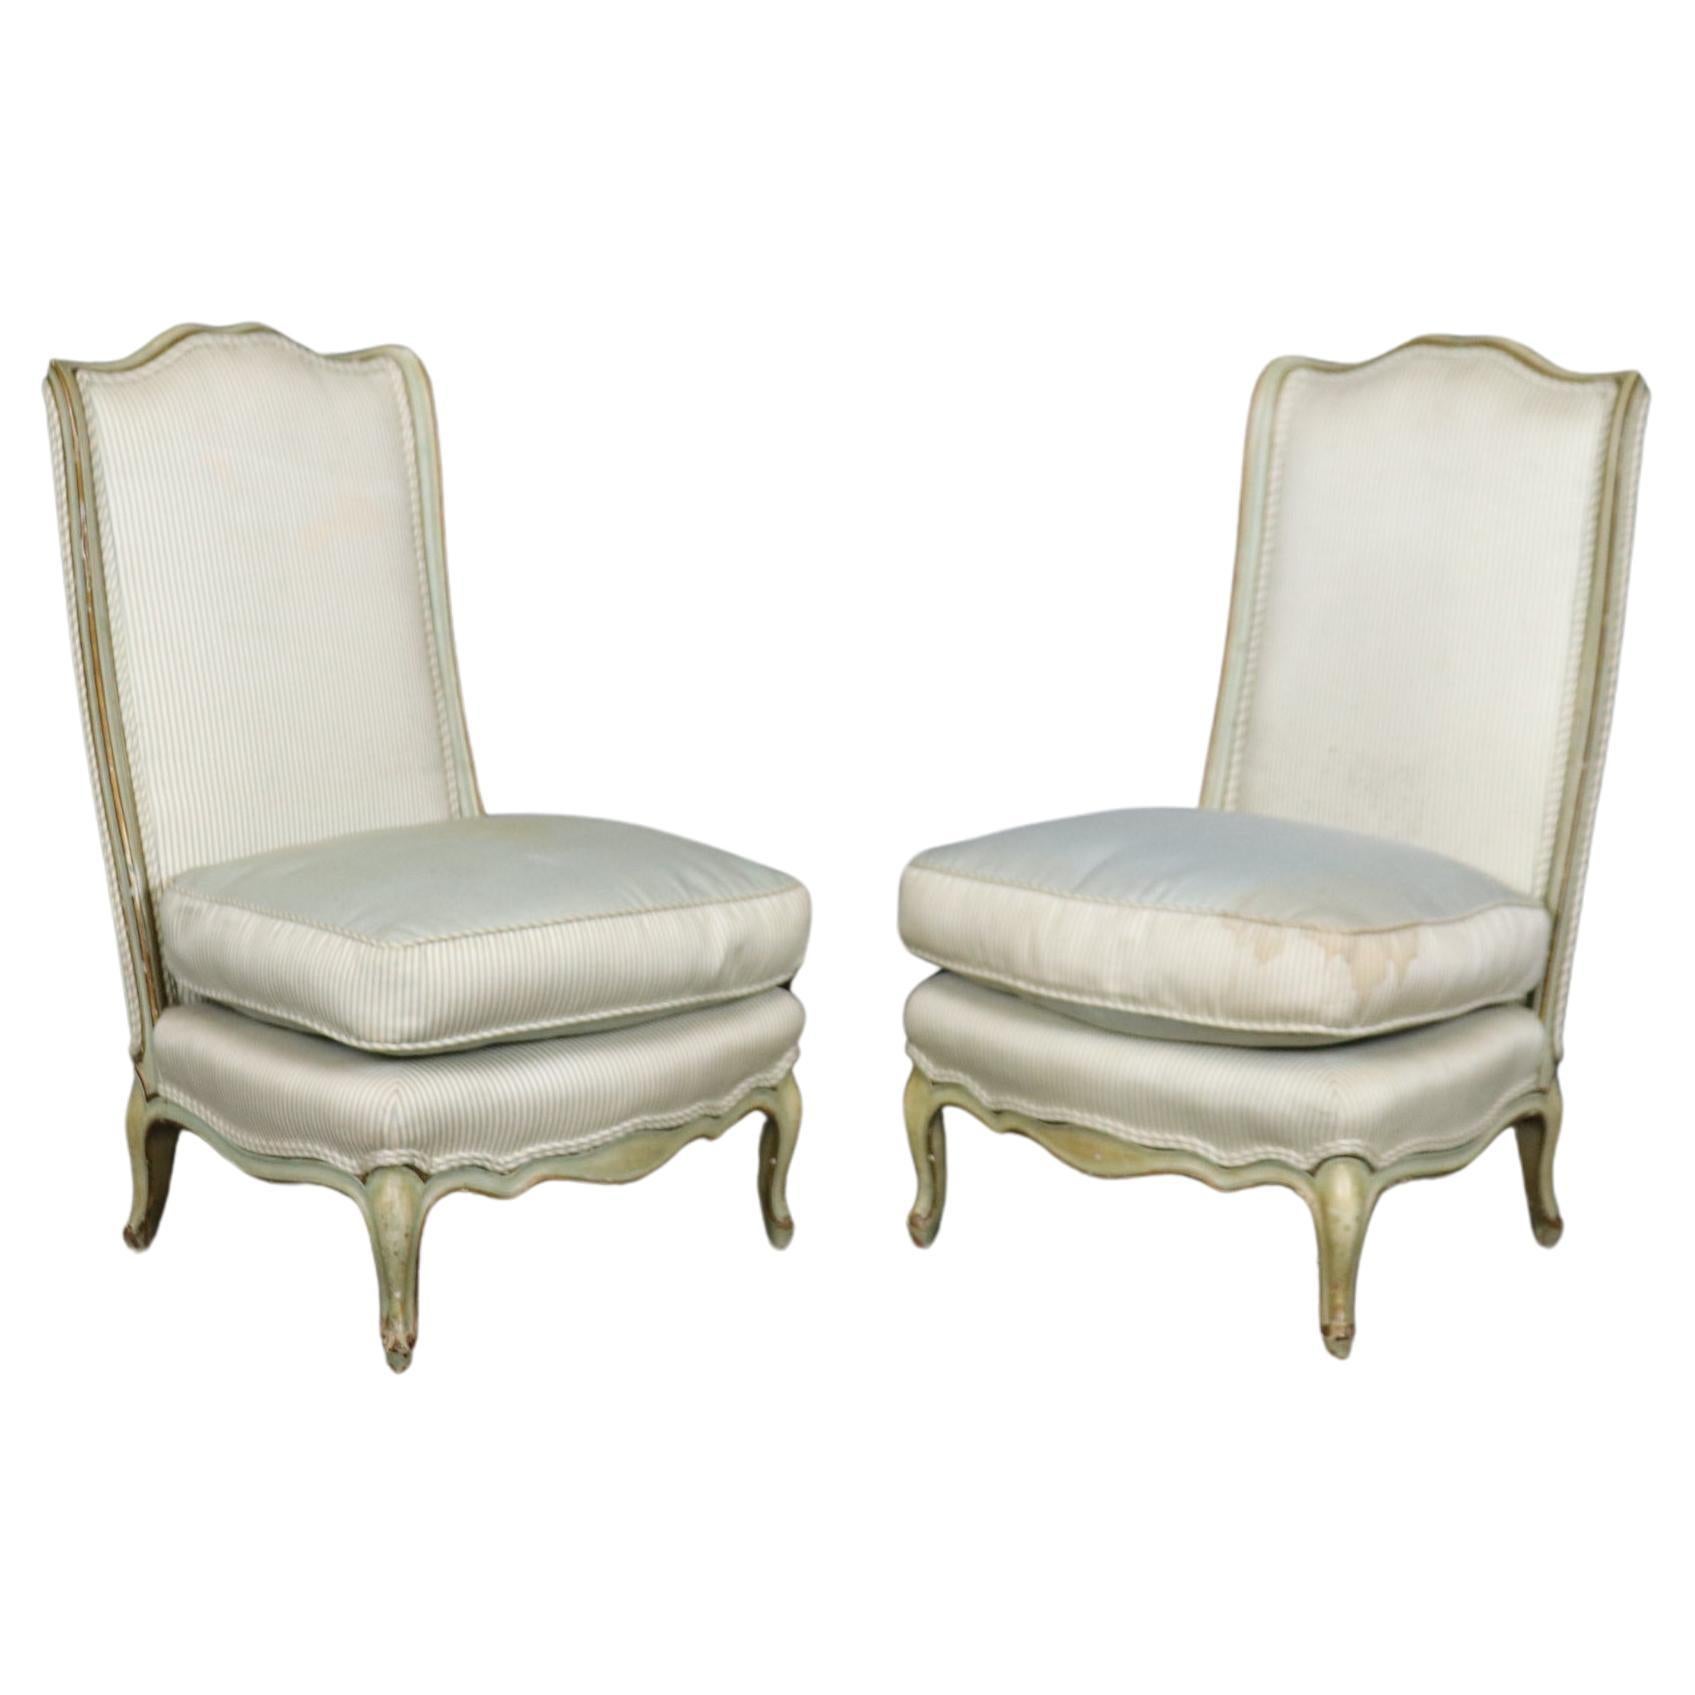 Pair of Paint Decorated French Louis XV Boudoir Slipper Chairs Circa 1920 For Sale